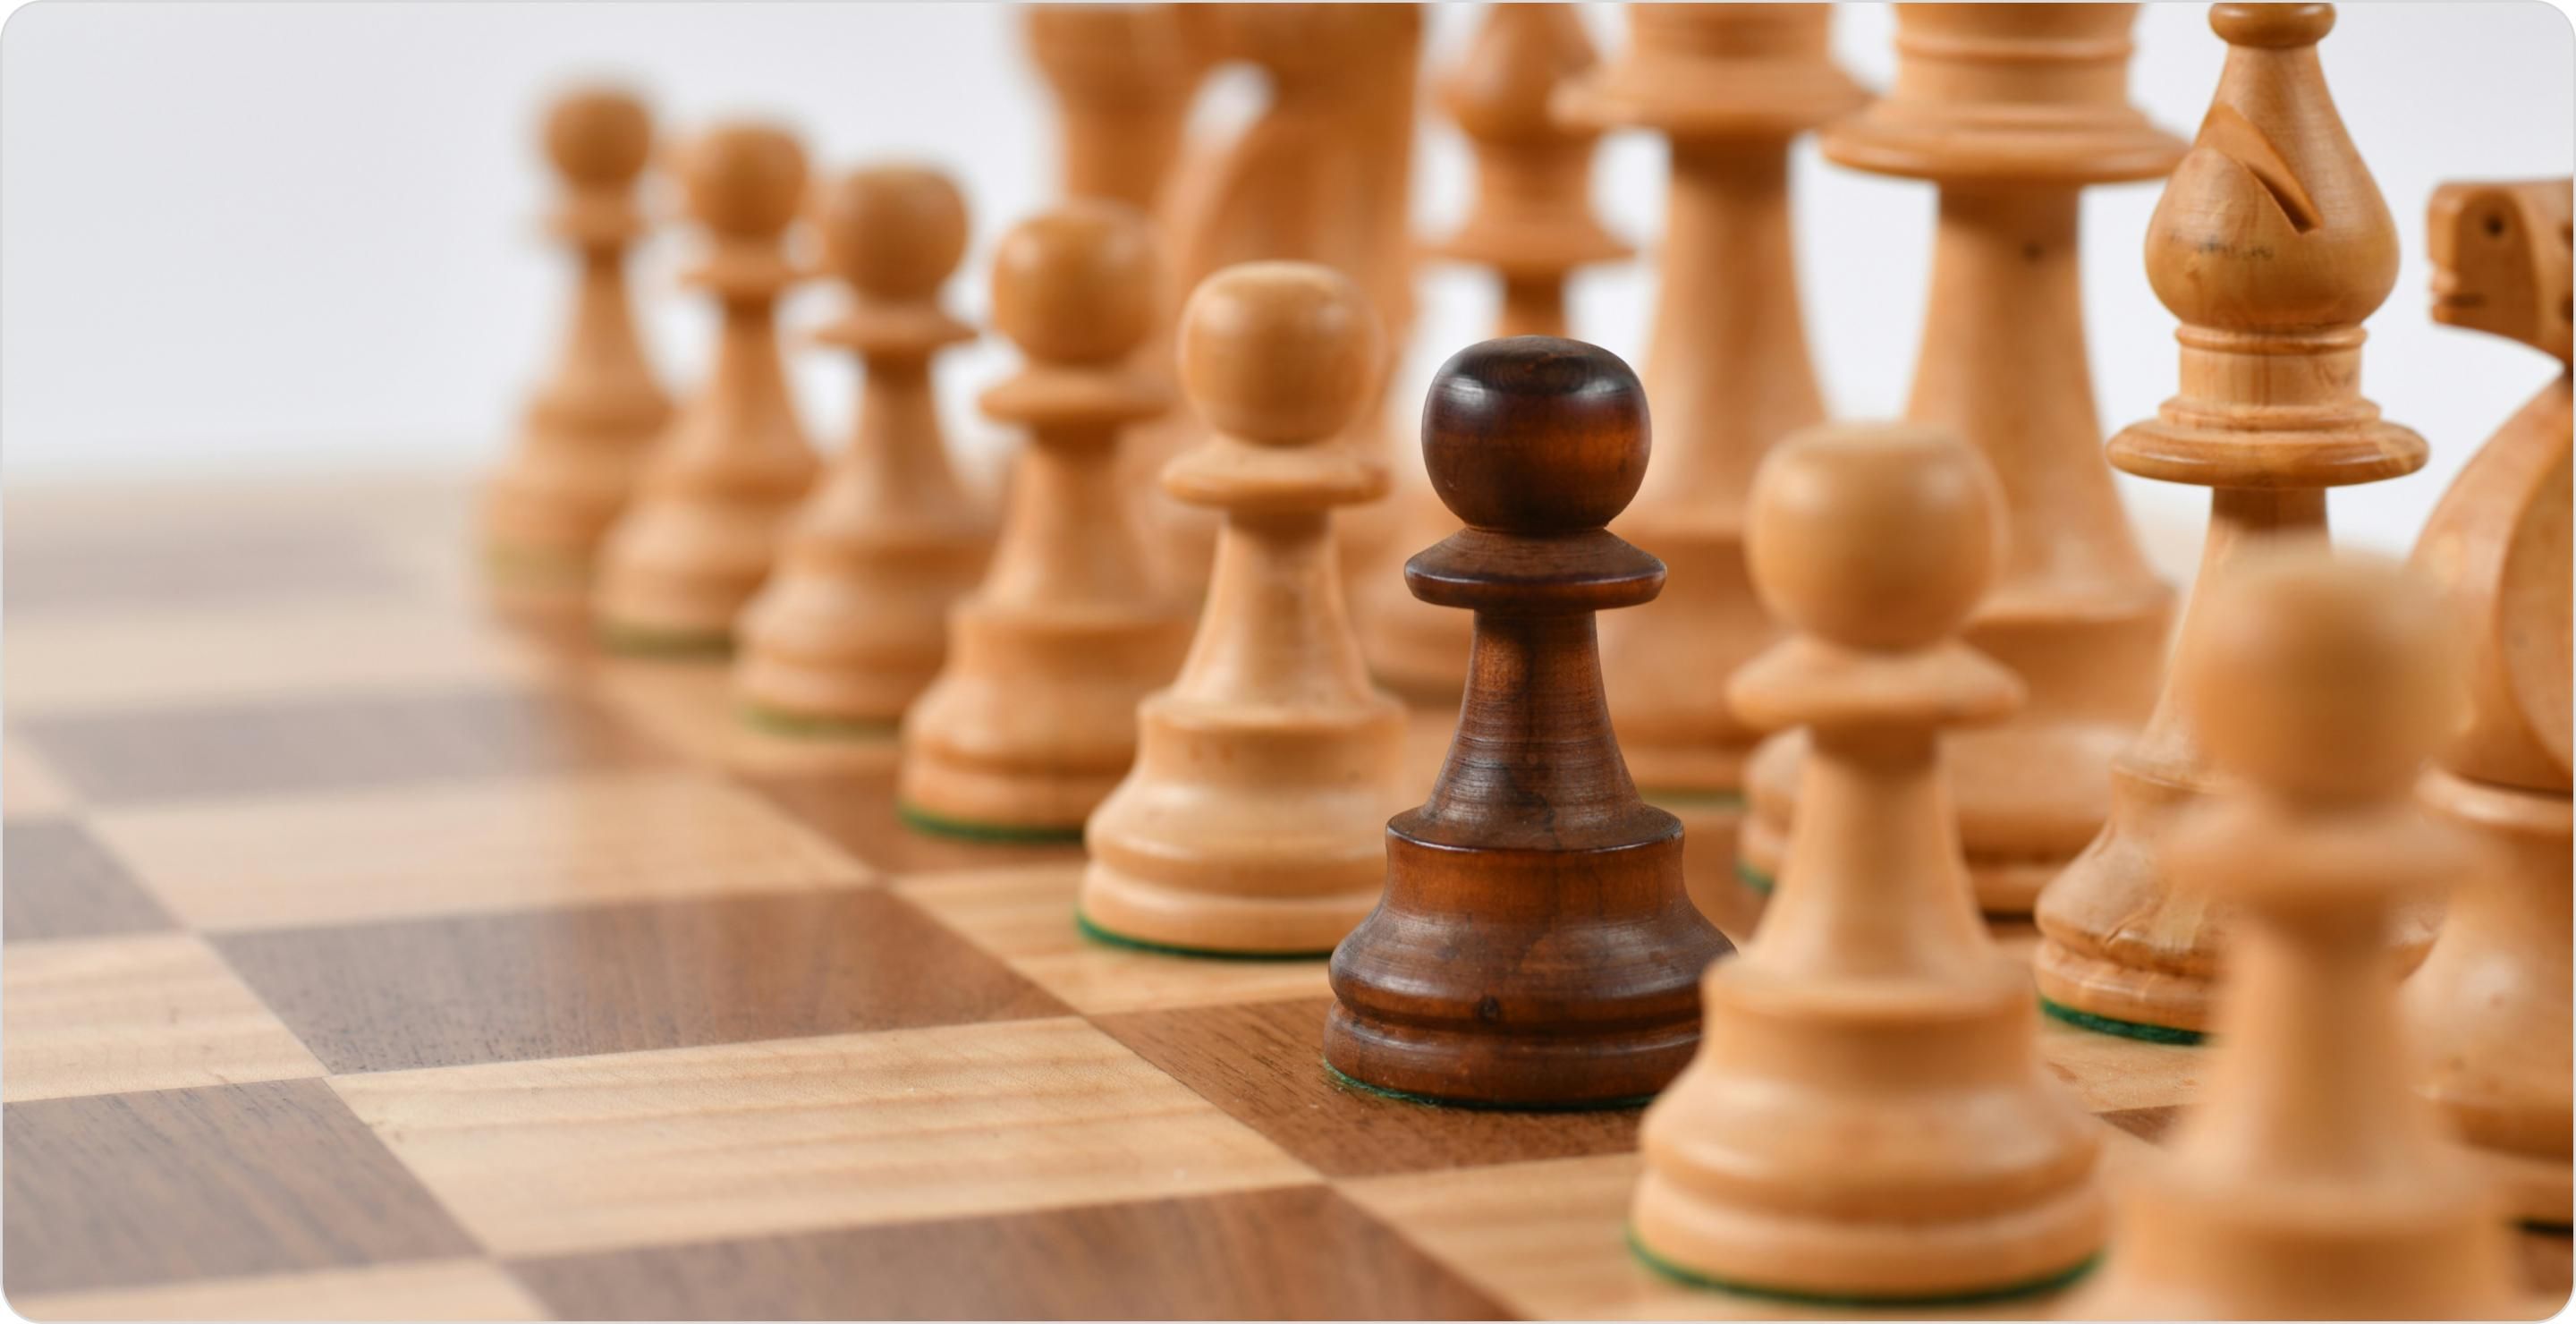 Close up of a chess board set up with pieces in starting positions. One pawn is dark amongst the light colored pieces to illustrate market segment identification.